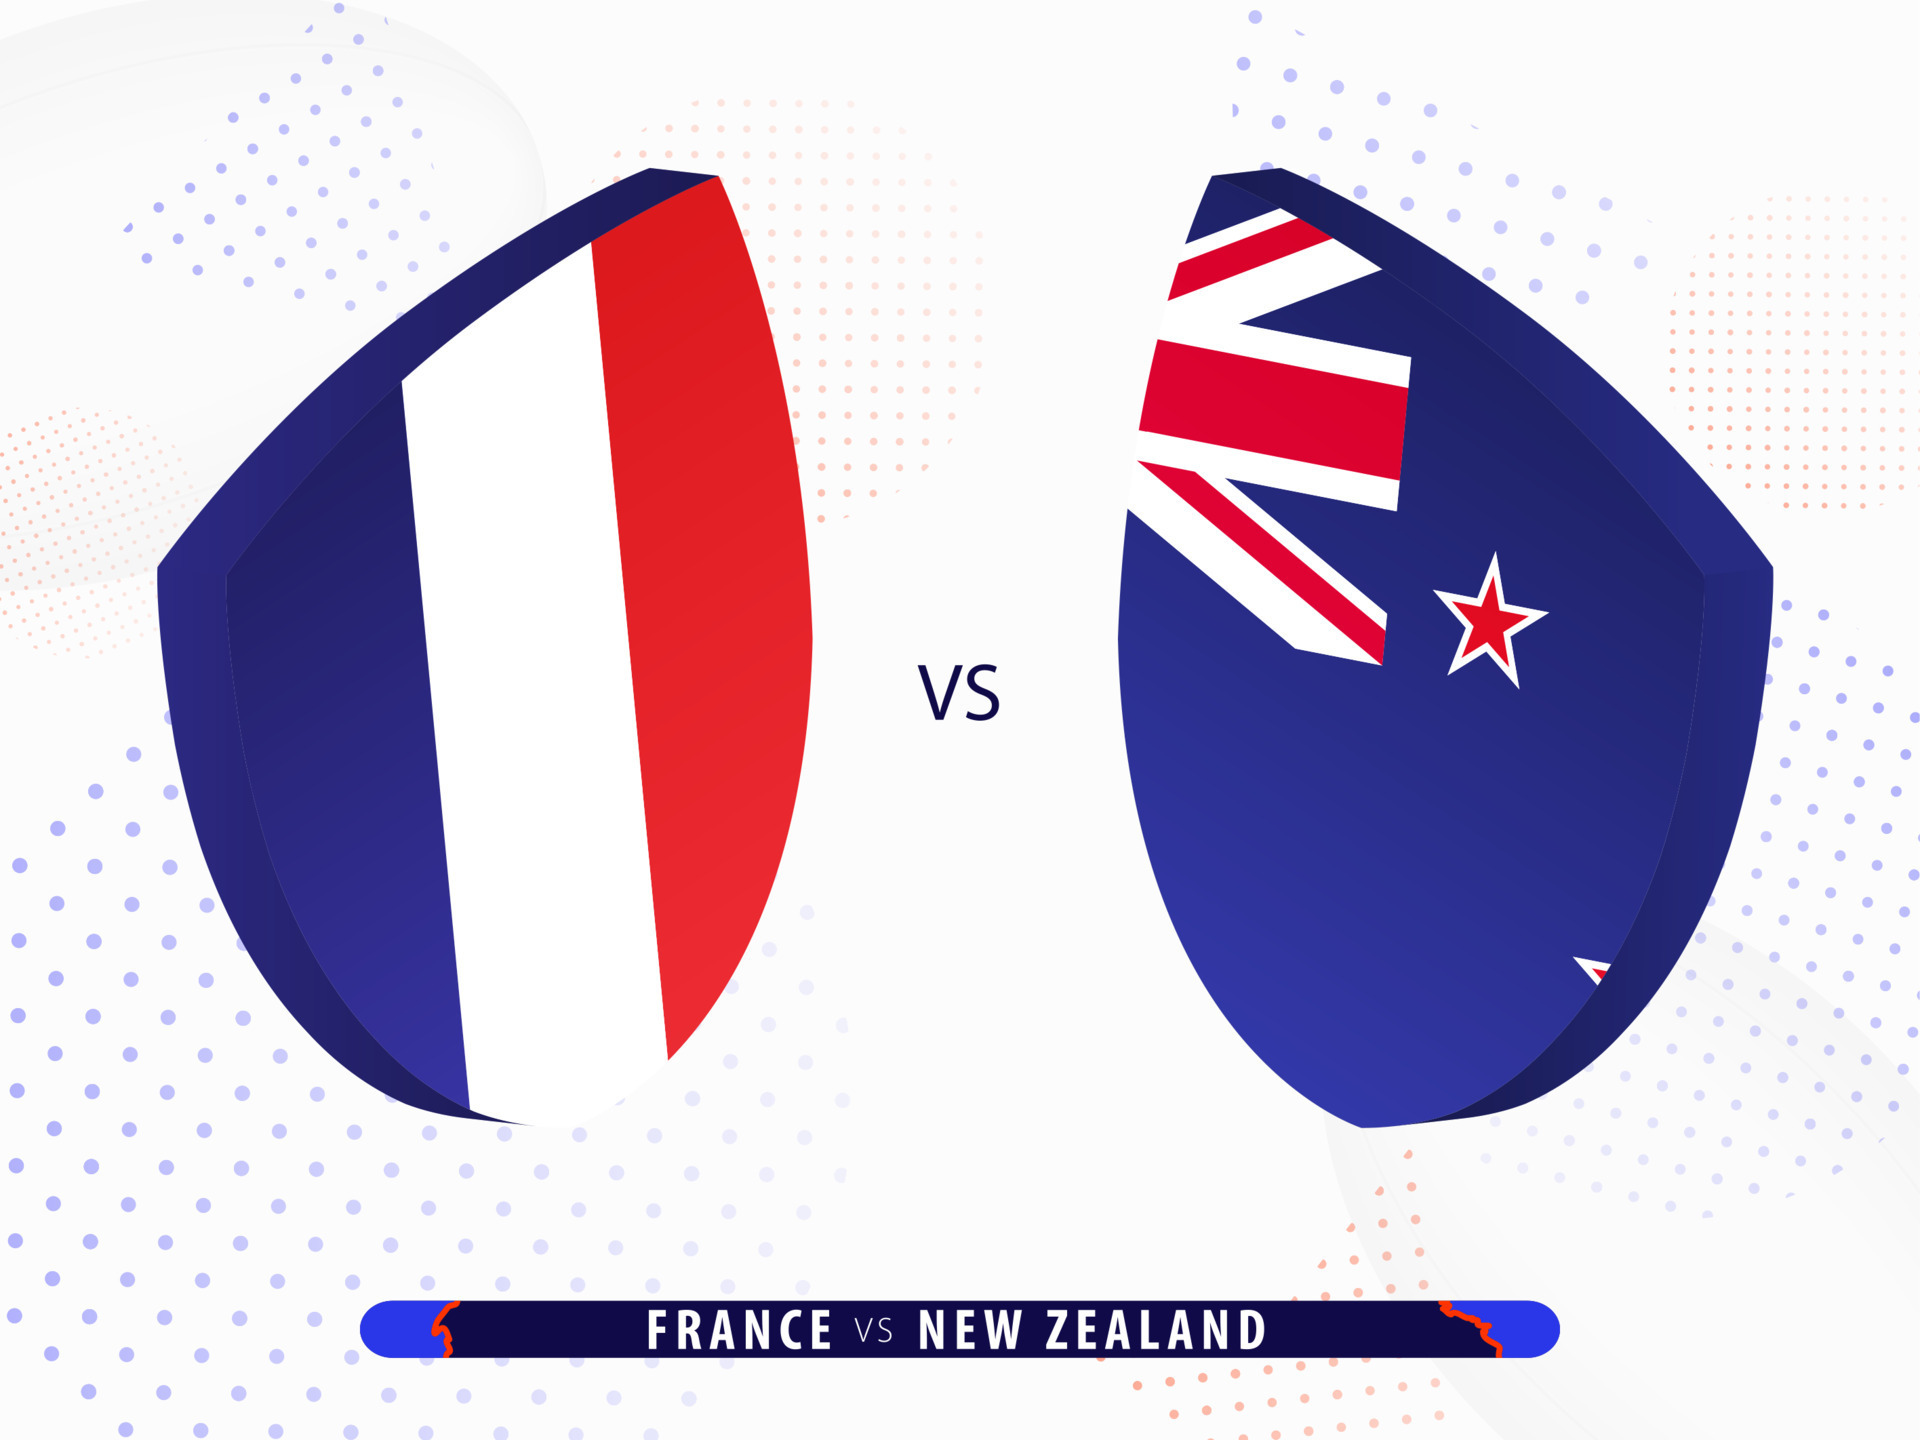 France vs New Zealand rugby match, international rugby competition 2023